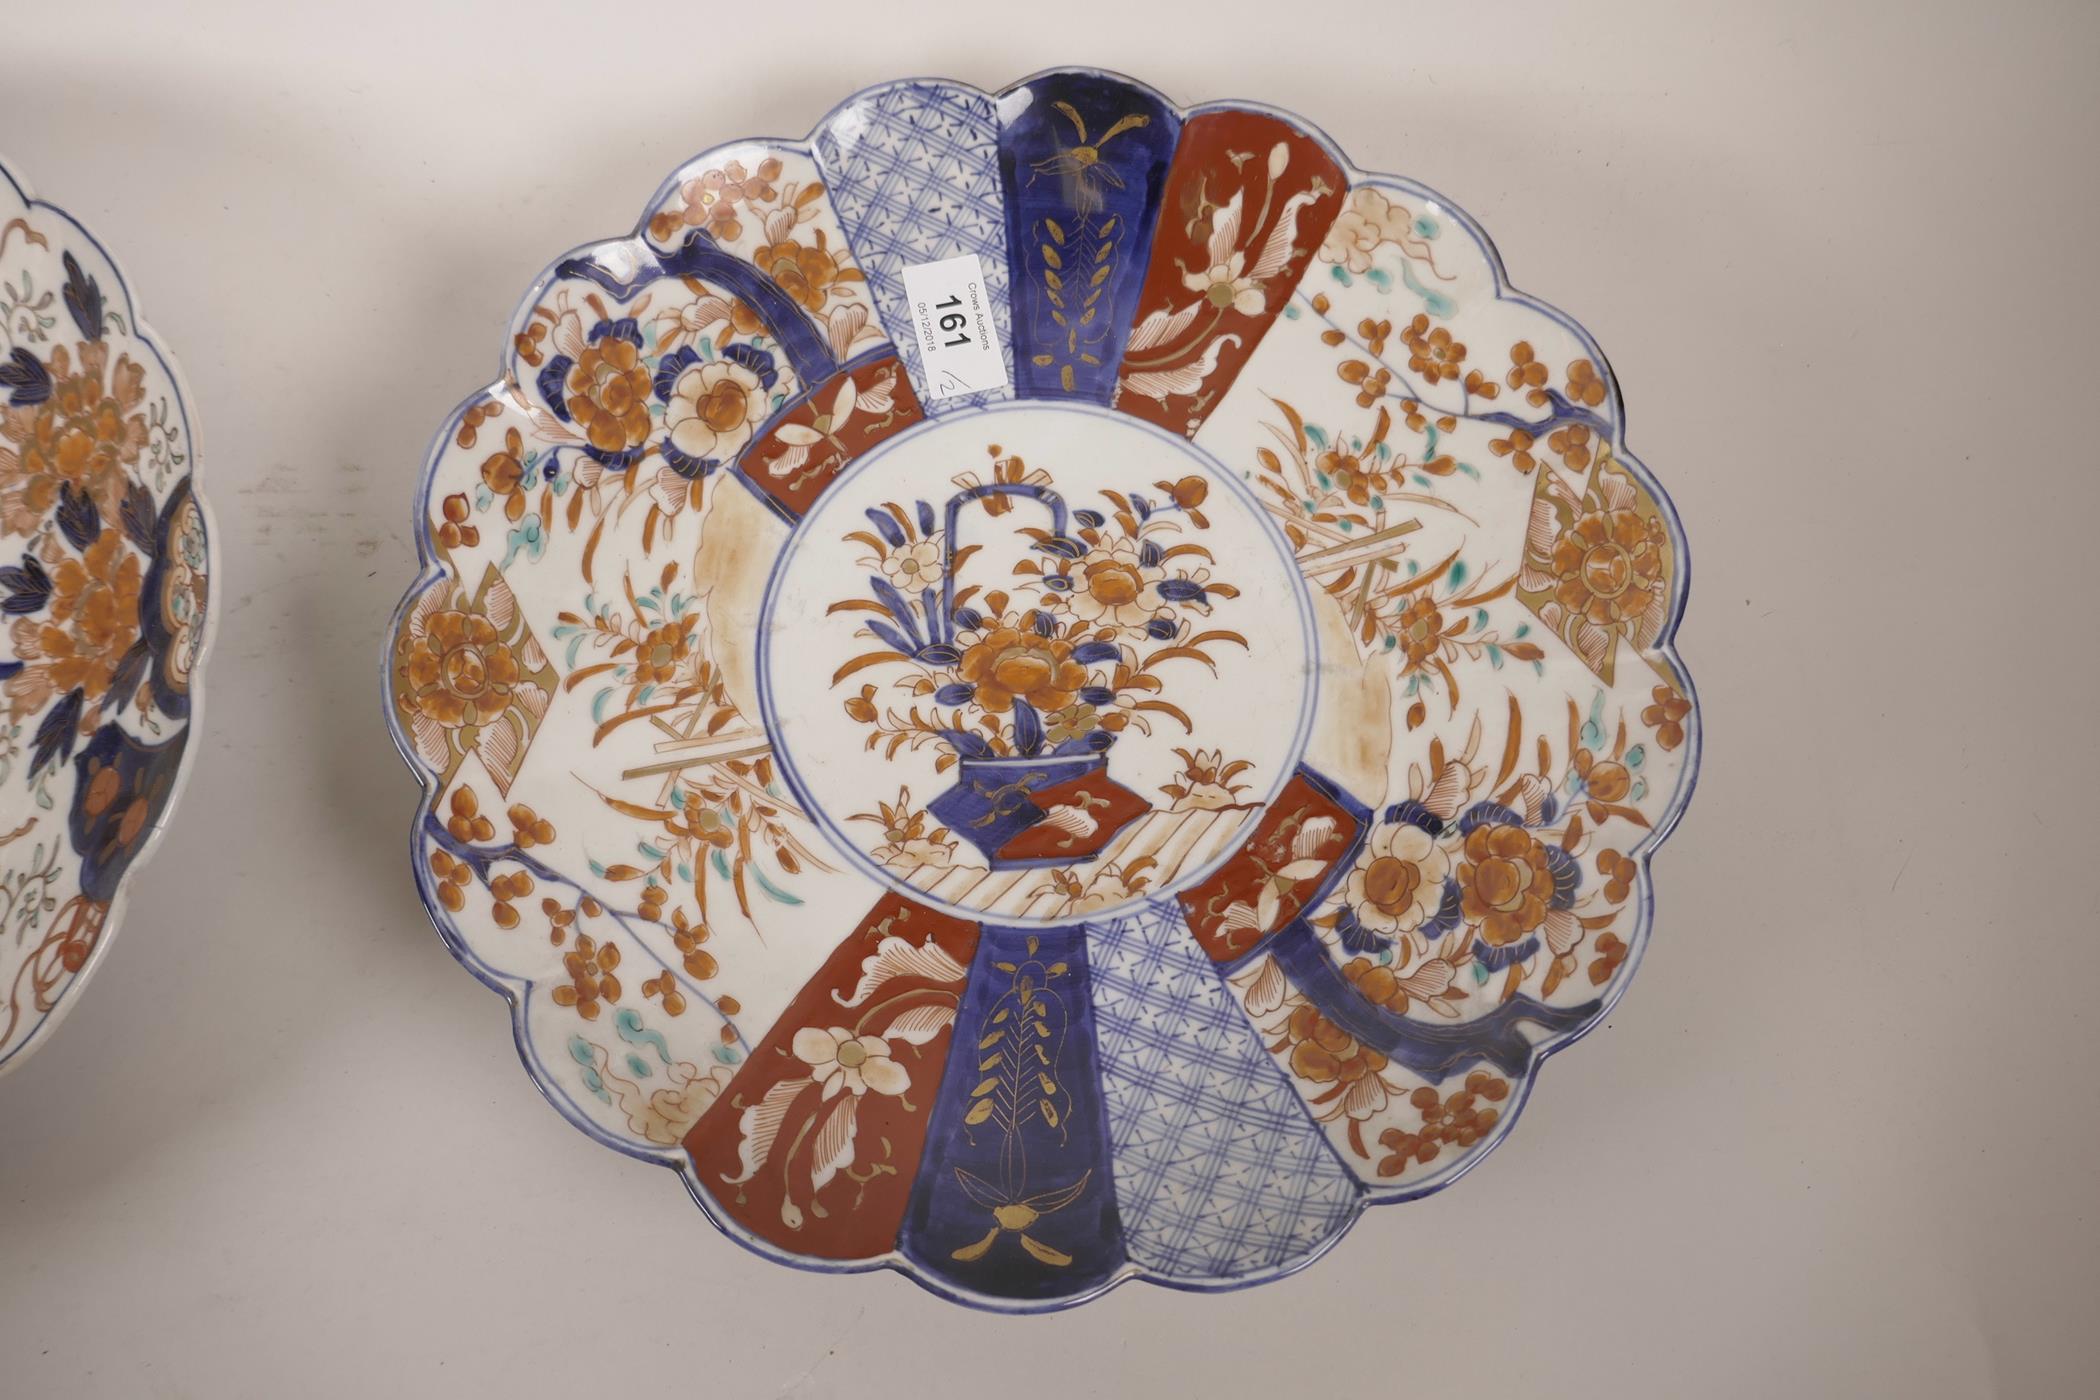 Two C19th Japanese Imari dishes, with shaped rims and lobed bodies, 12" diameter - Image 3 of 6